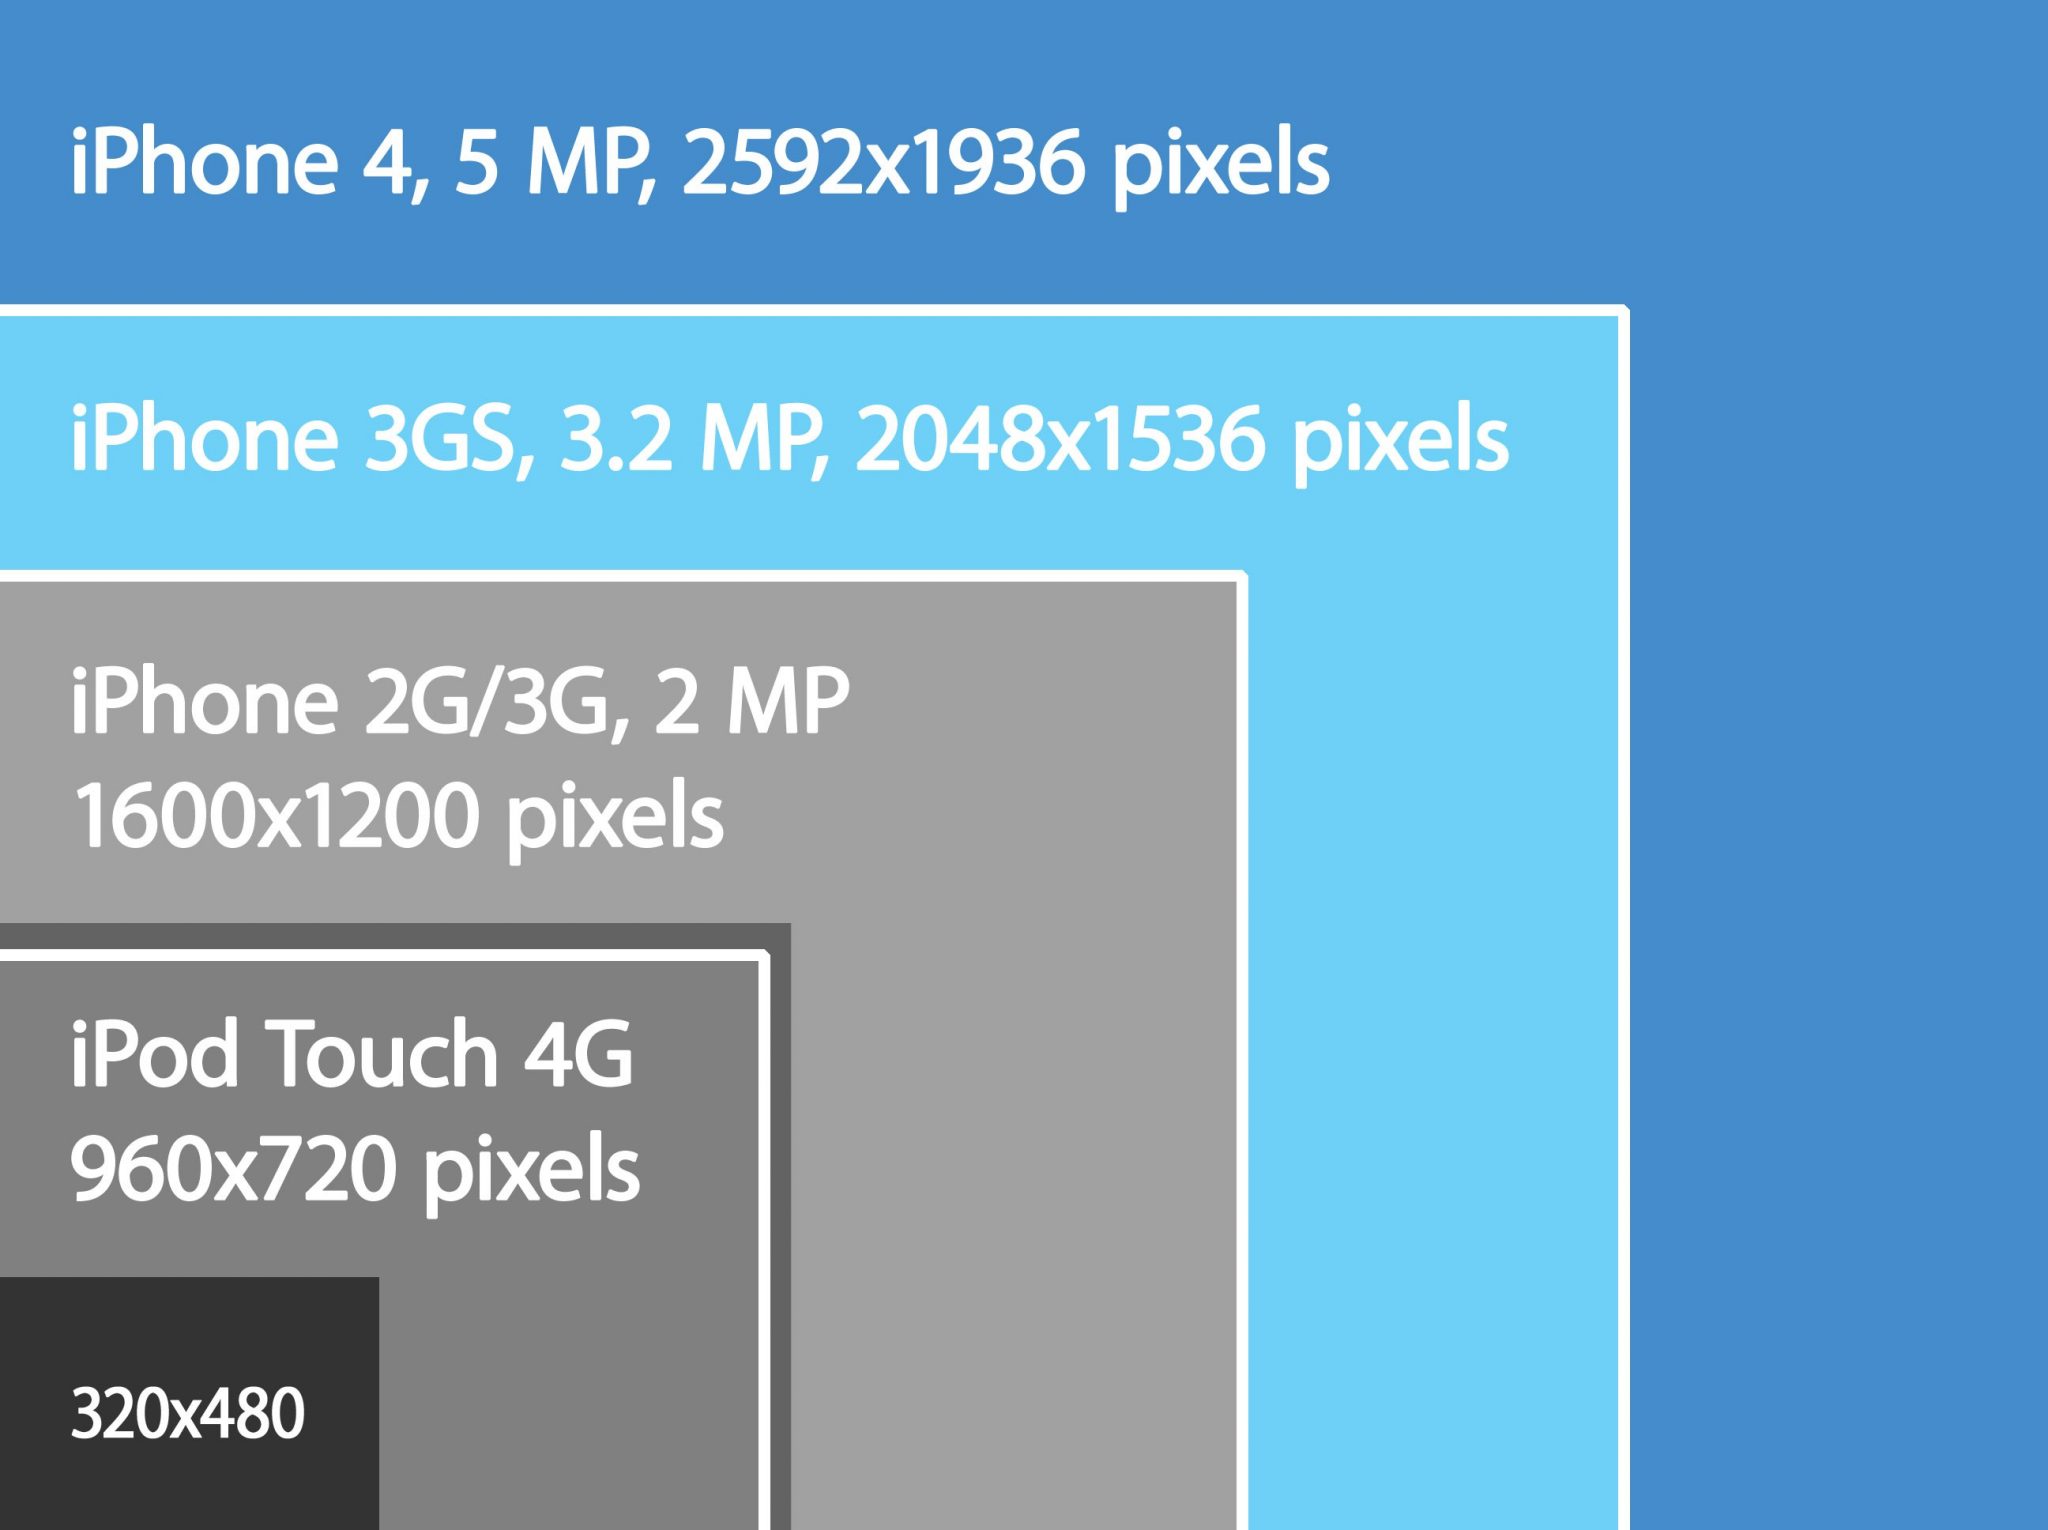 iPhone image sizes over the years [updated]